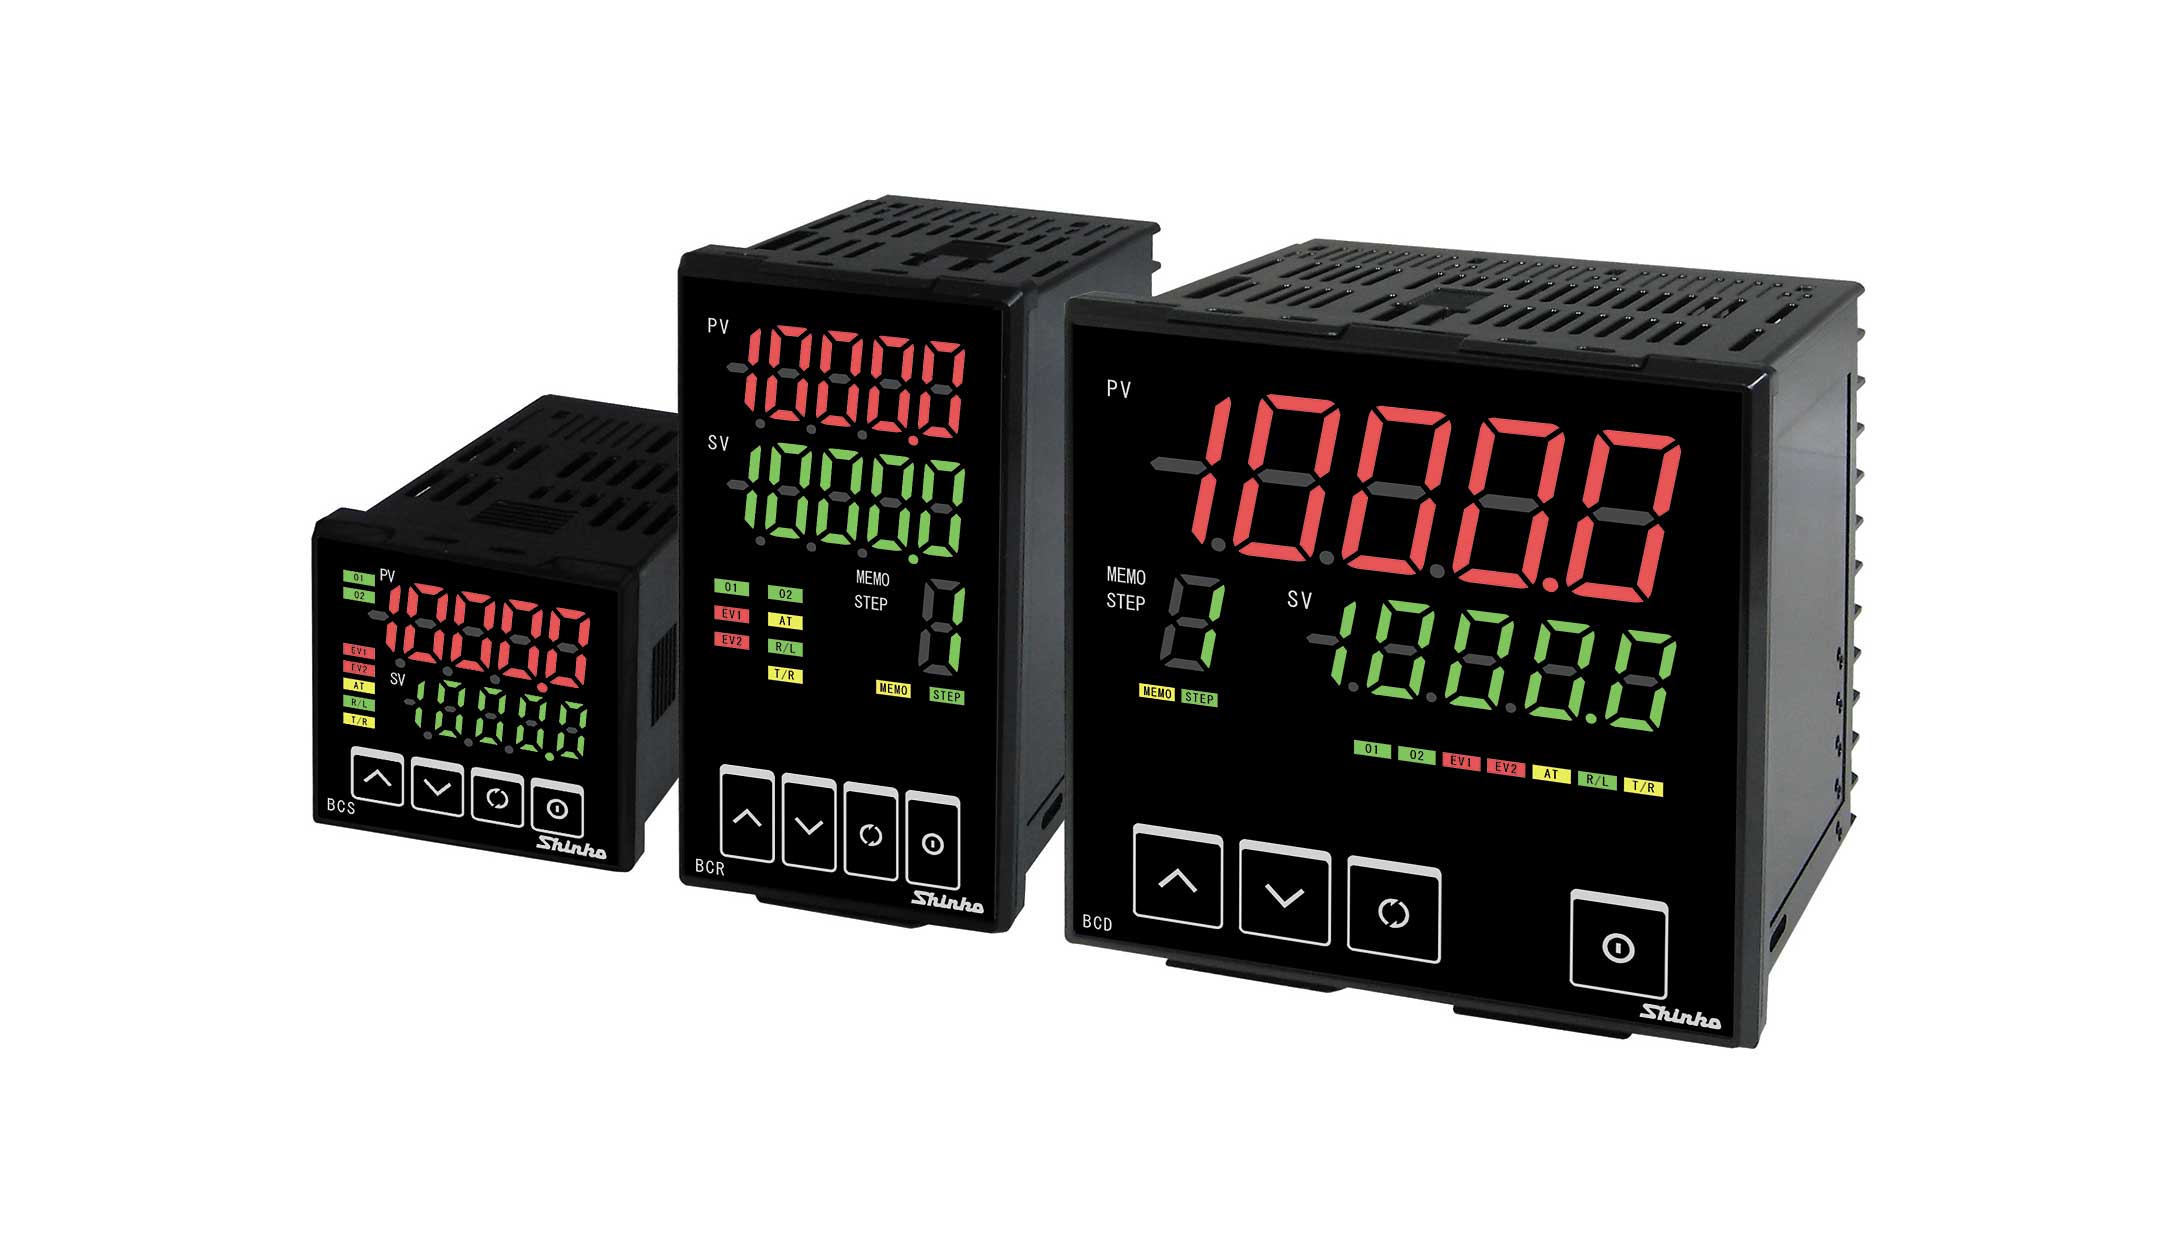 Controllers, displays, writers, timers, counters